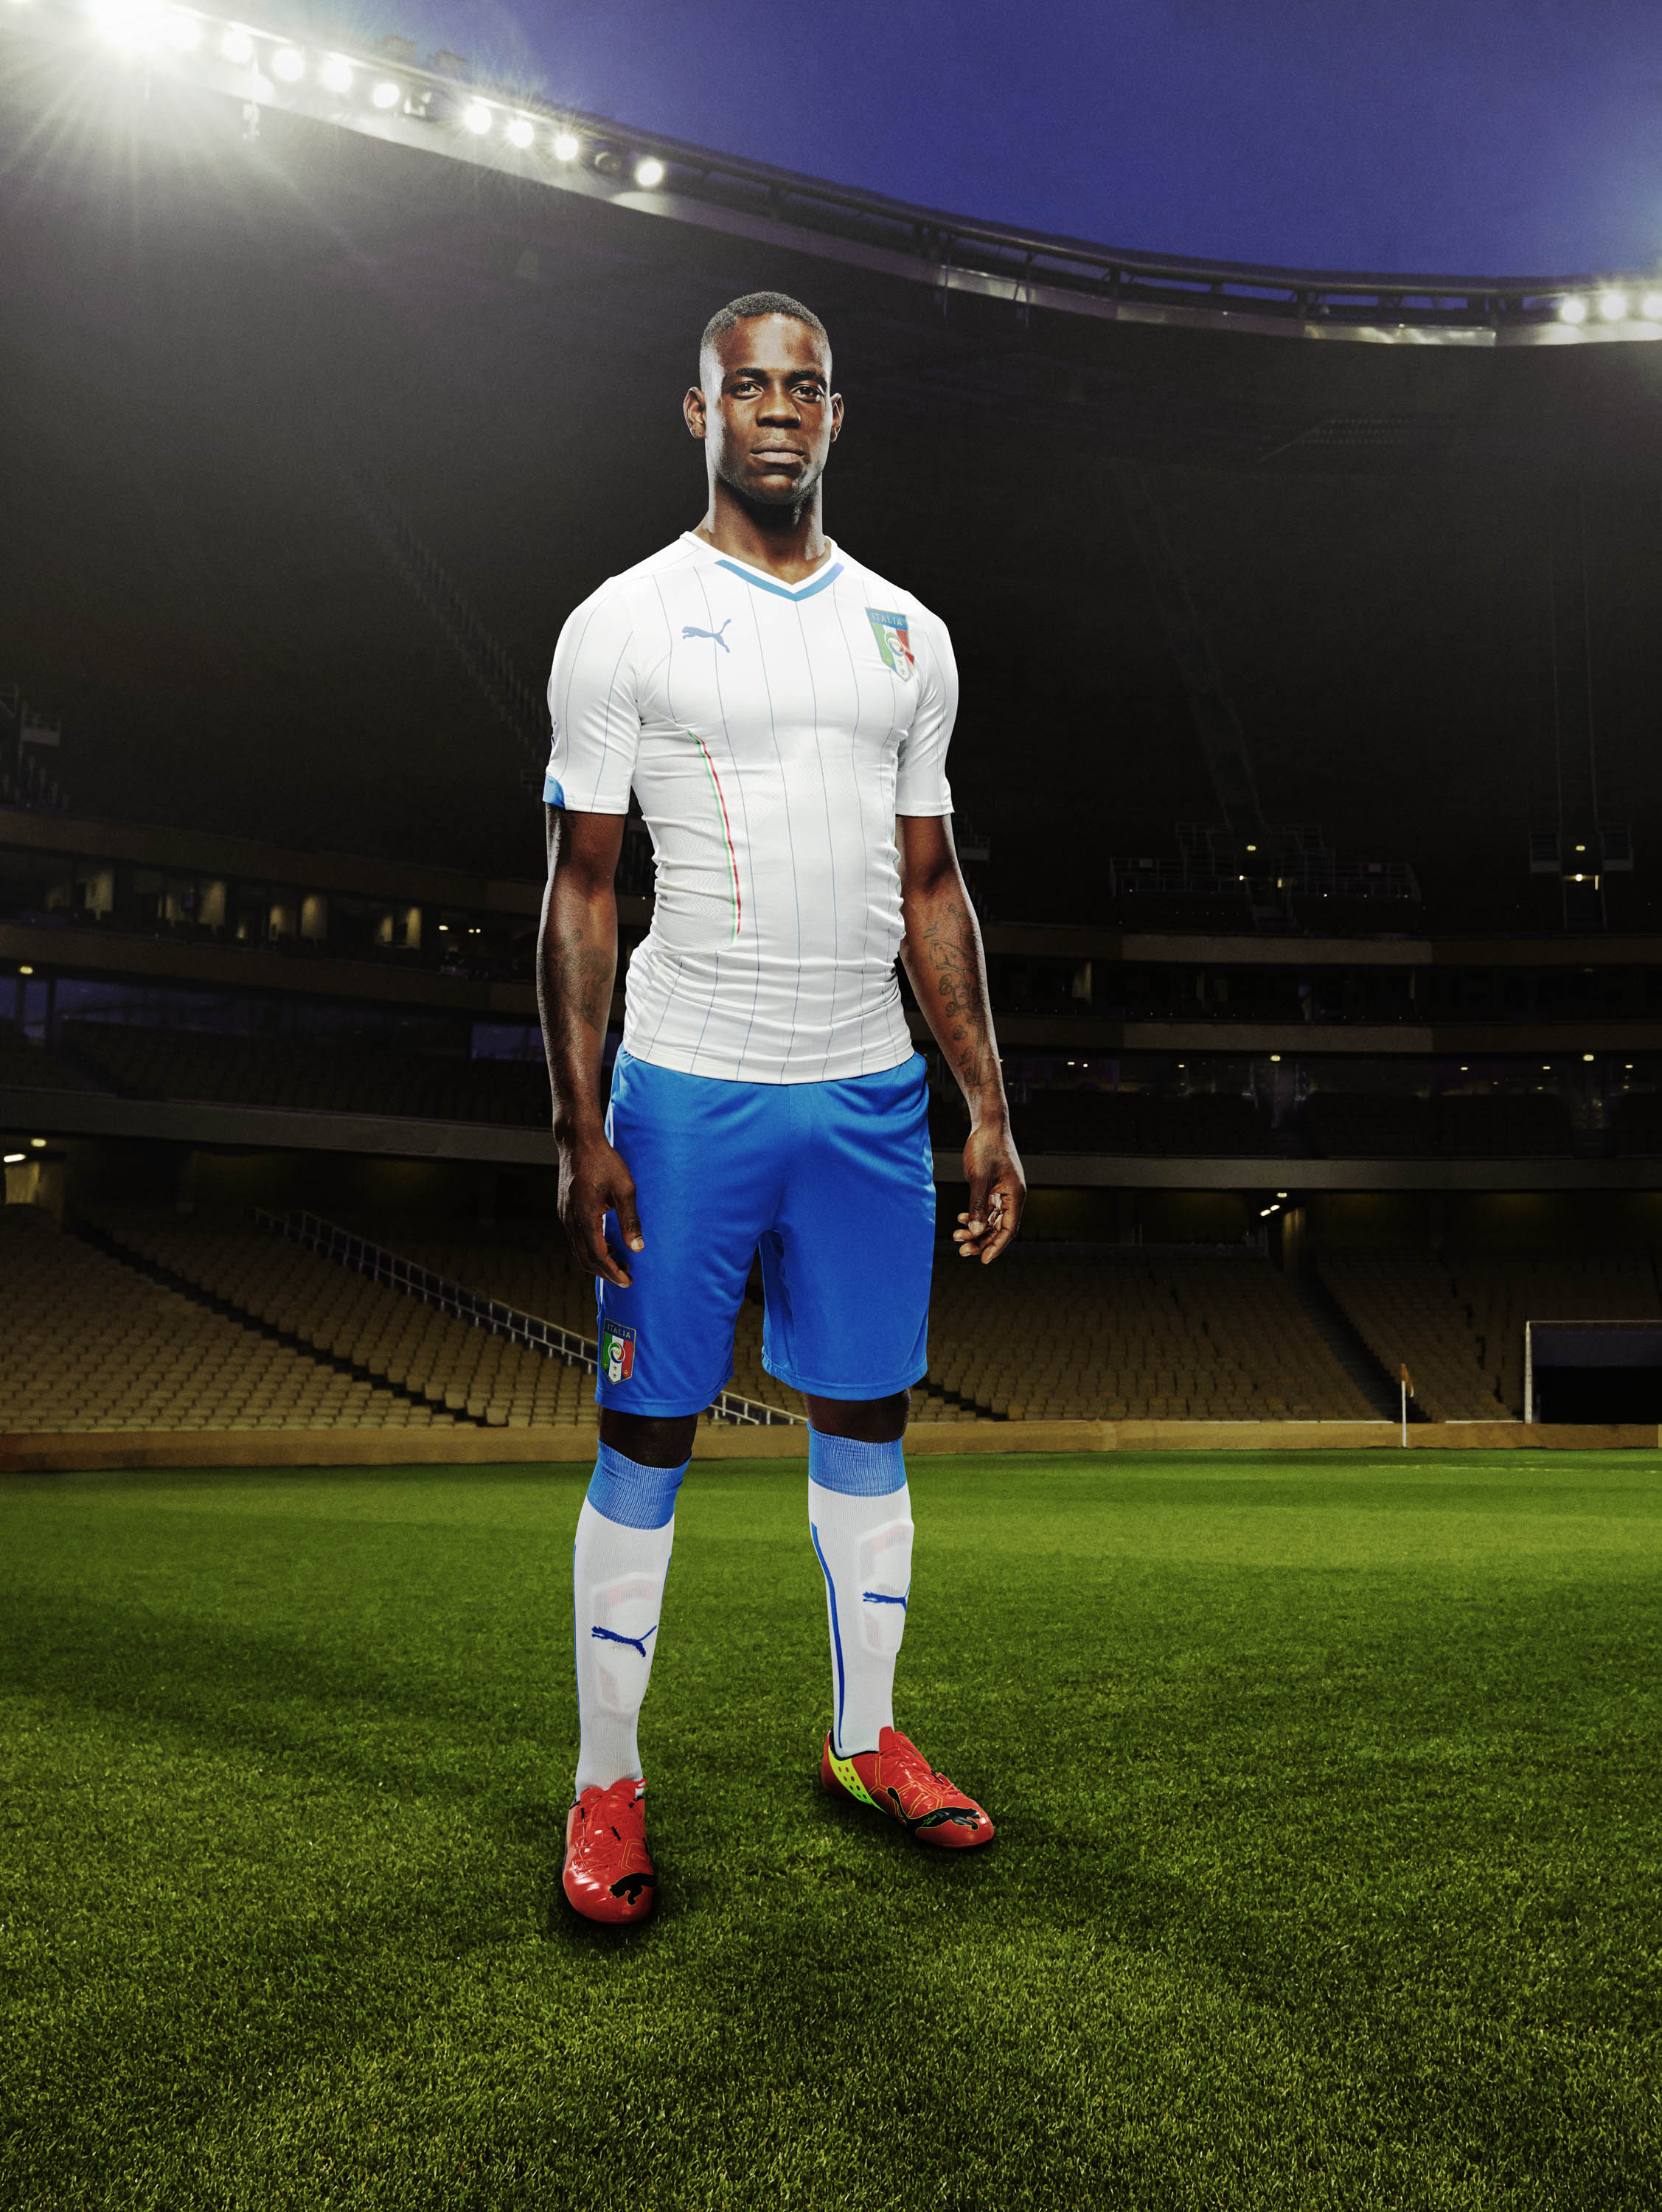 Mario Balotelli in the 2014 Italy Away Kit that features PUMA's PWR ACTV Technology